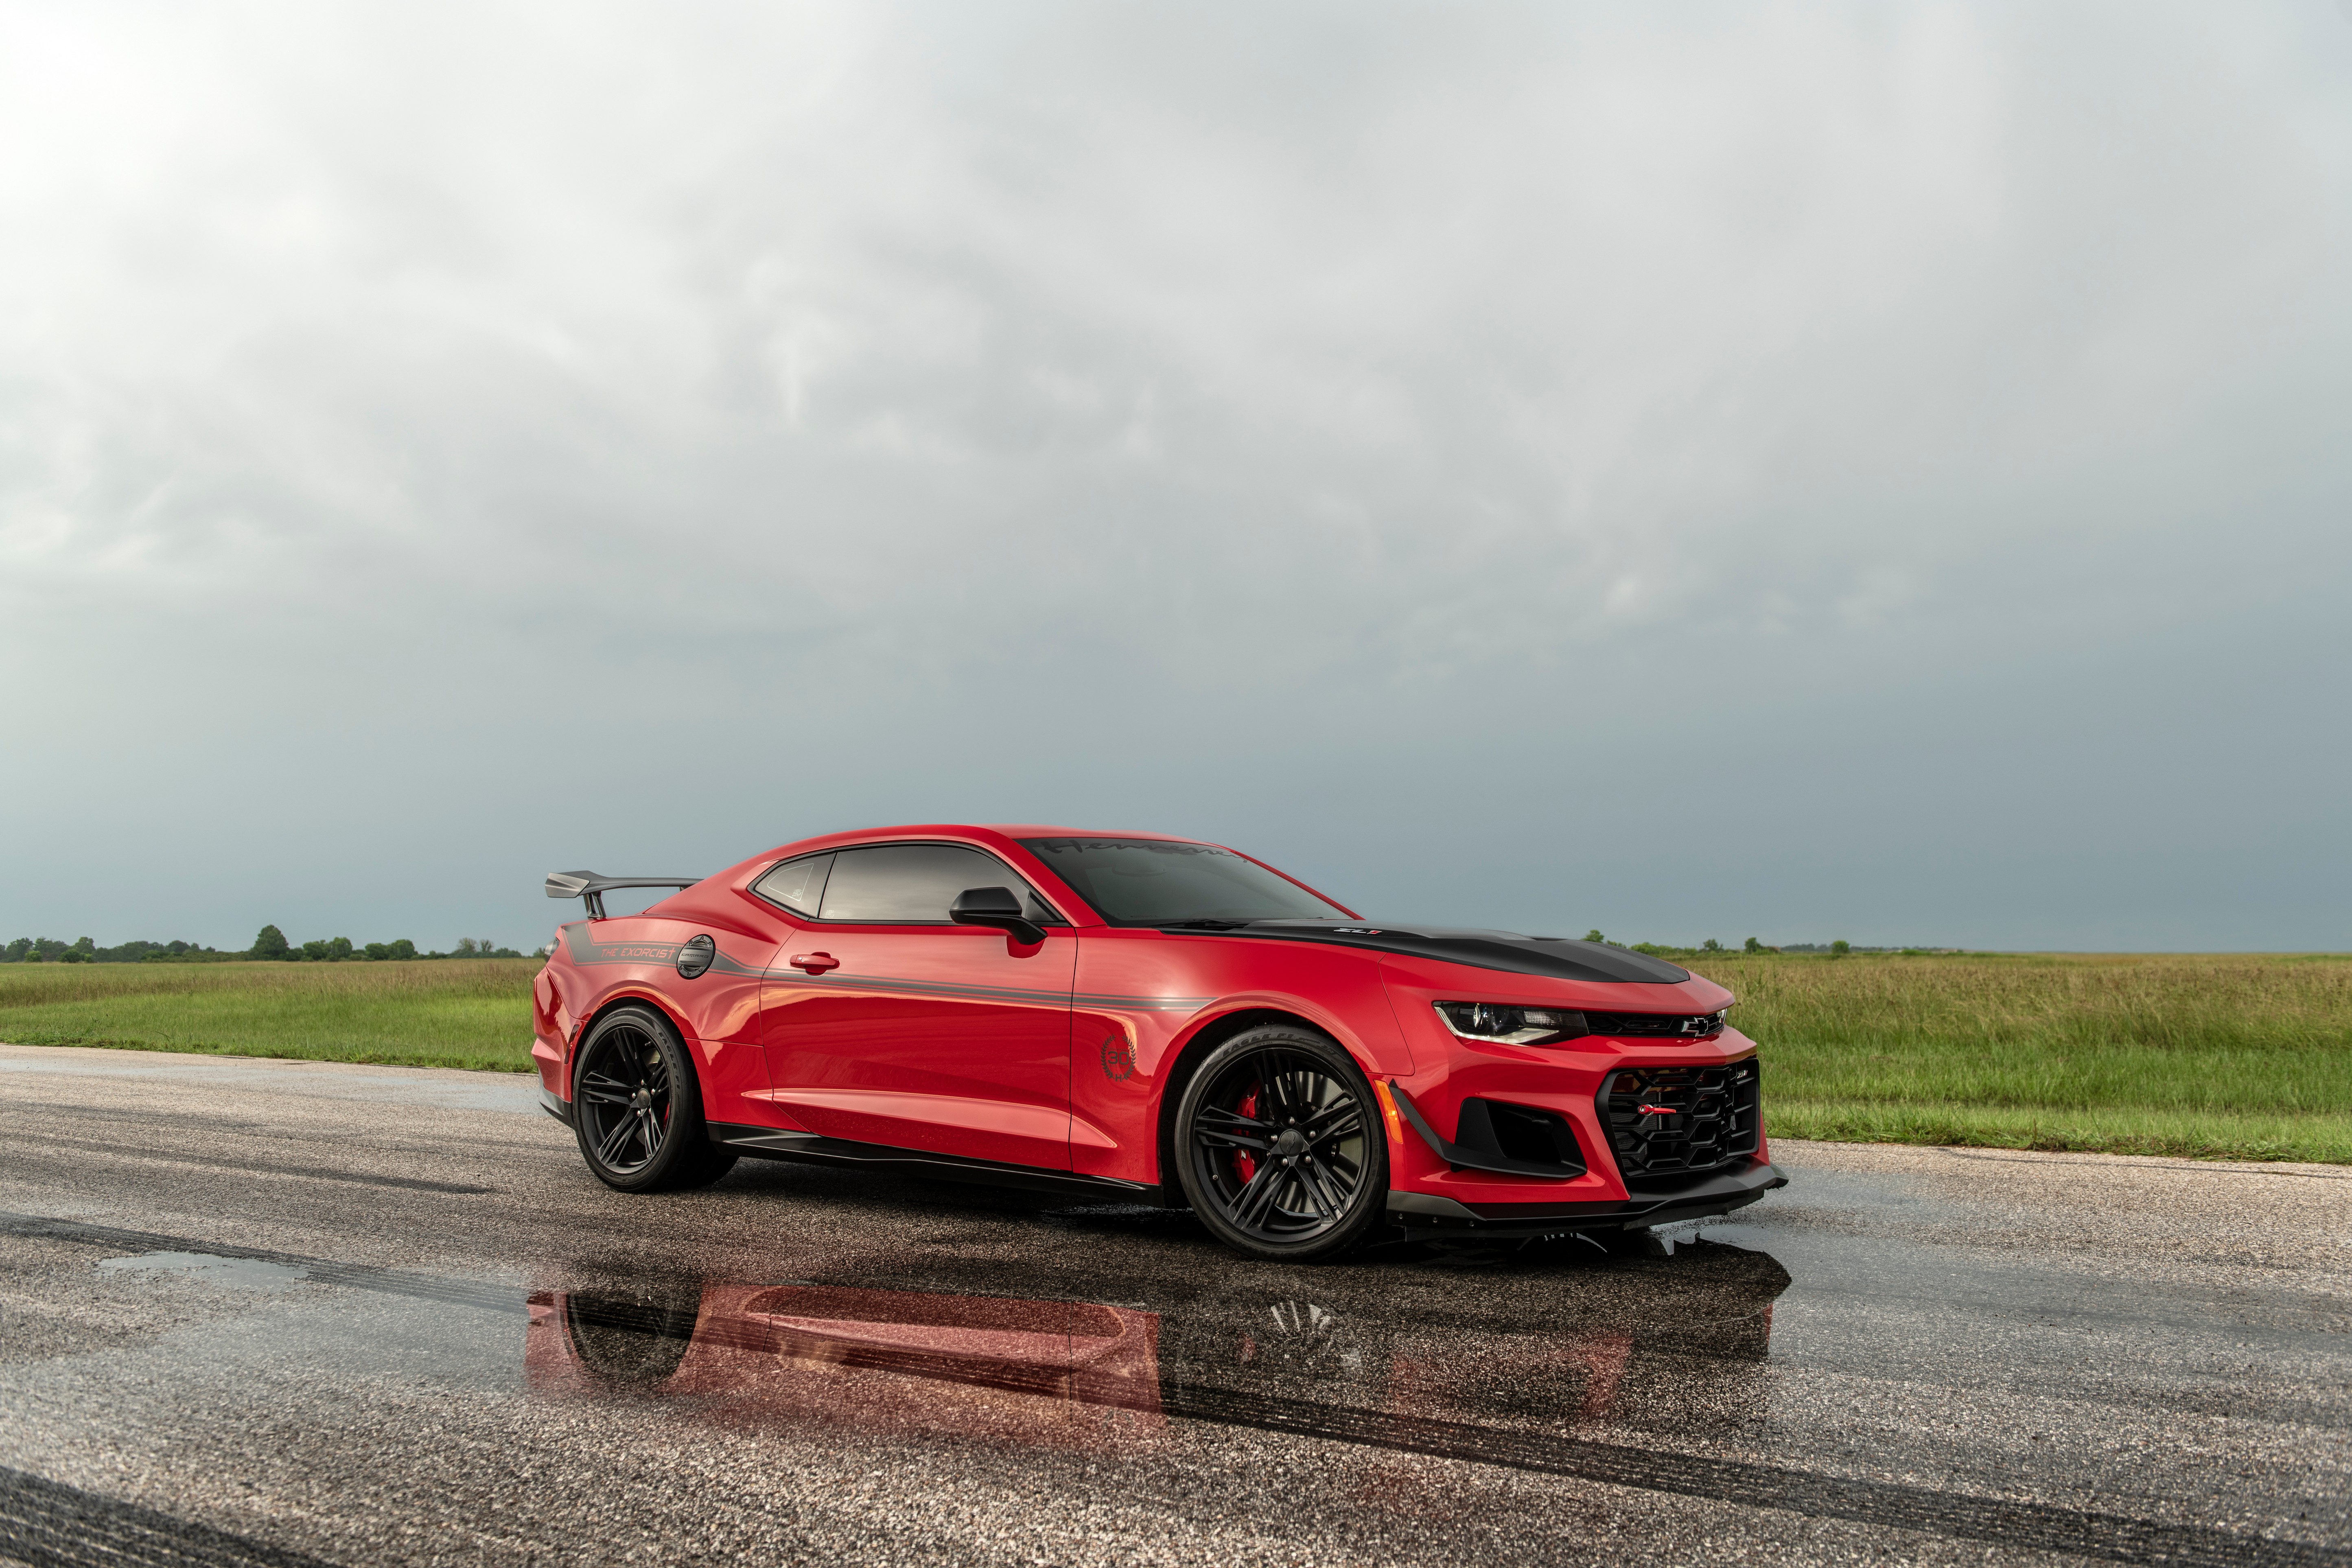 Download Chevrolet Camaro Zl1 wallpapers for mobile phone free  Chevrolet Camaro Zl1 HD pictures